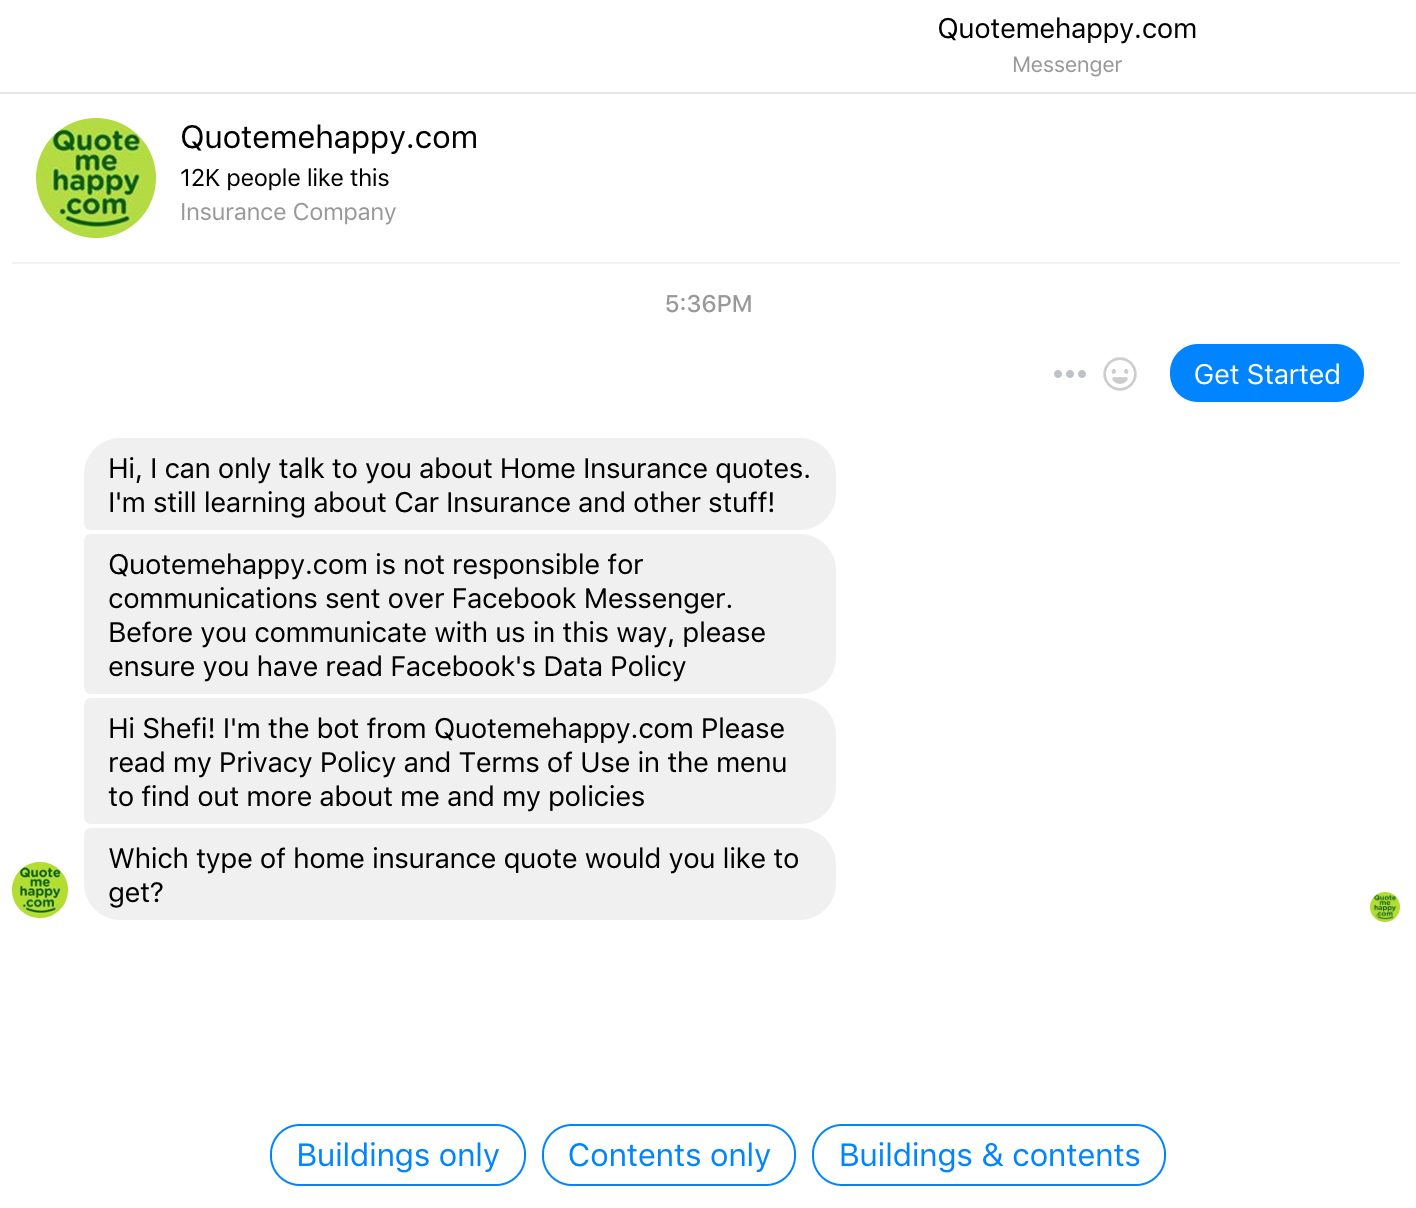 Quotemehappy.com Launches Facebook Messenger Bot For Home Insurance